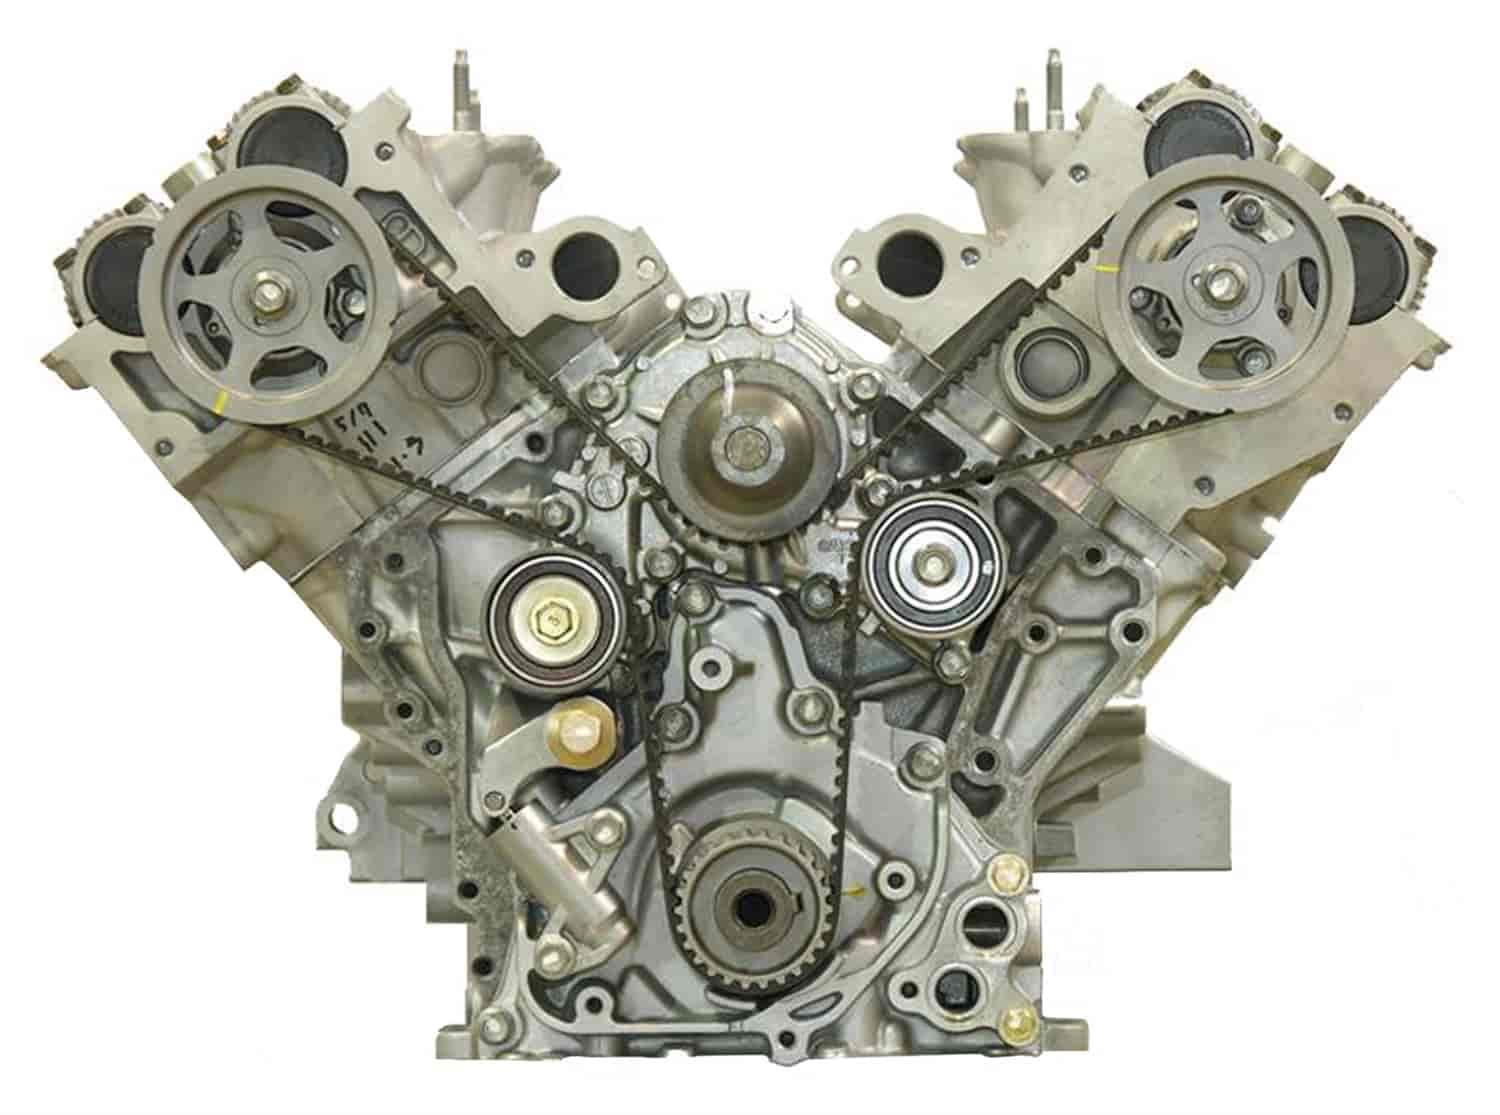 Remanufactured Crate Engine for 1998-2003 Isuzu with 3.5L V6